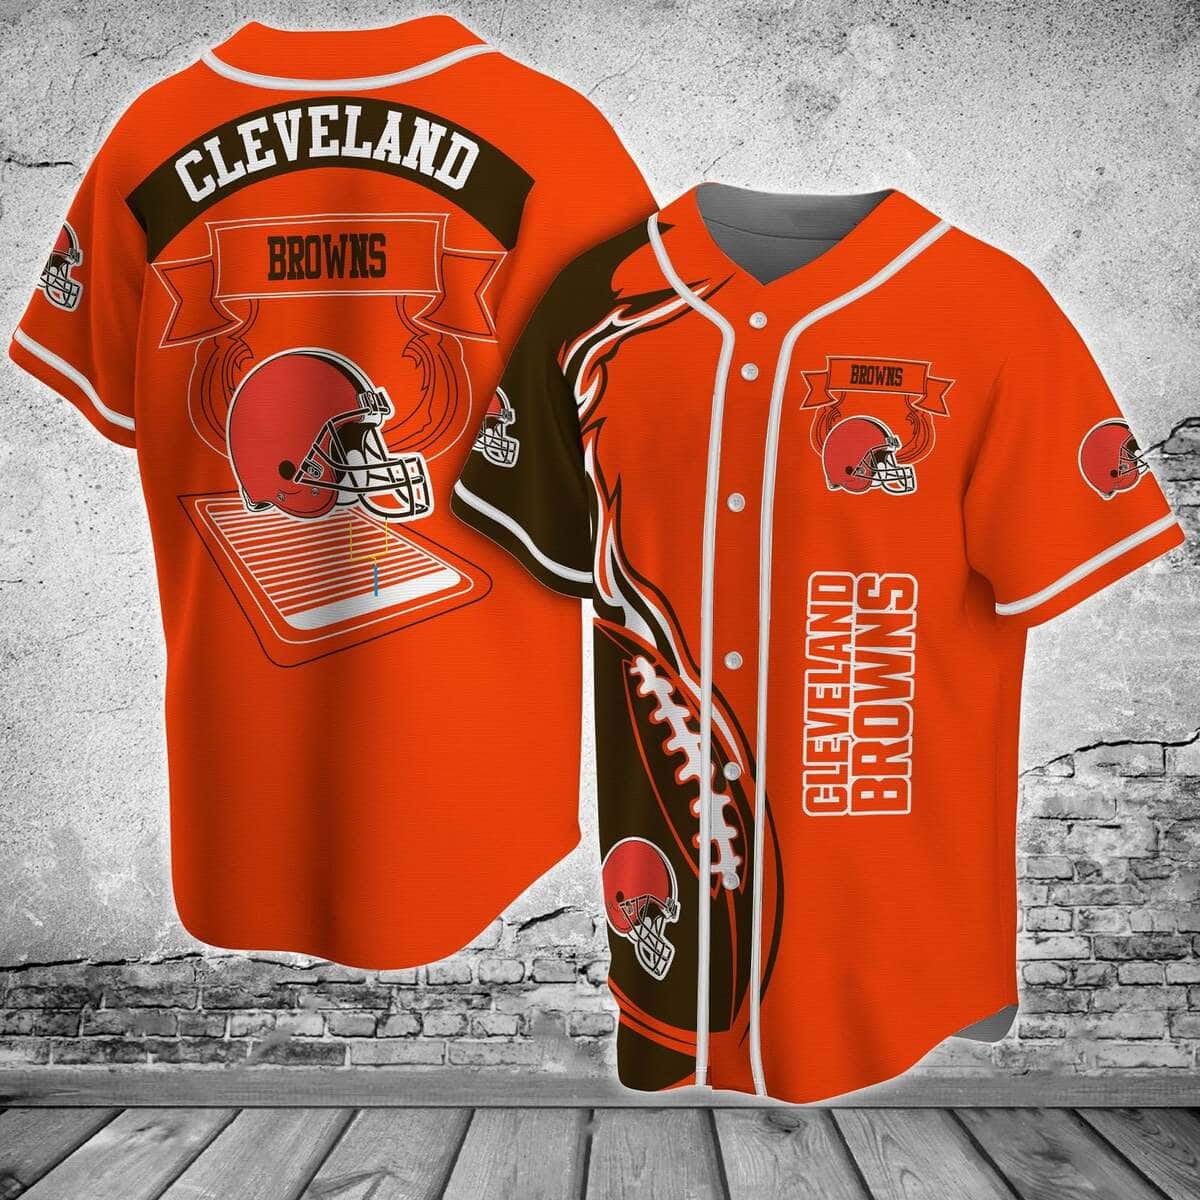 Red NFL Cleveland Browns Baseball Jersey Fire Ball Gift For Family